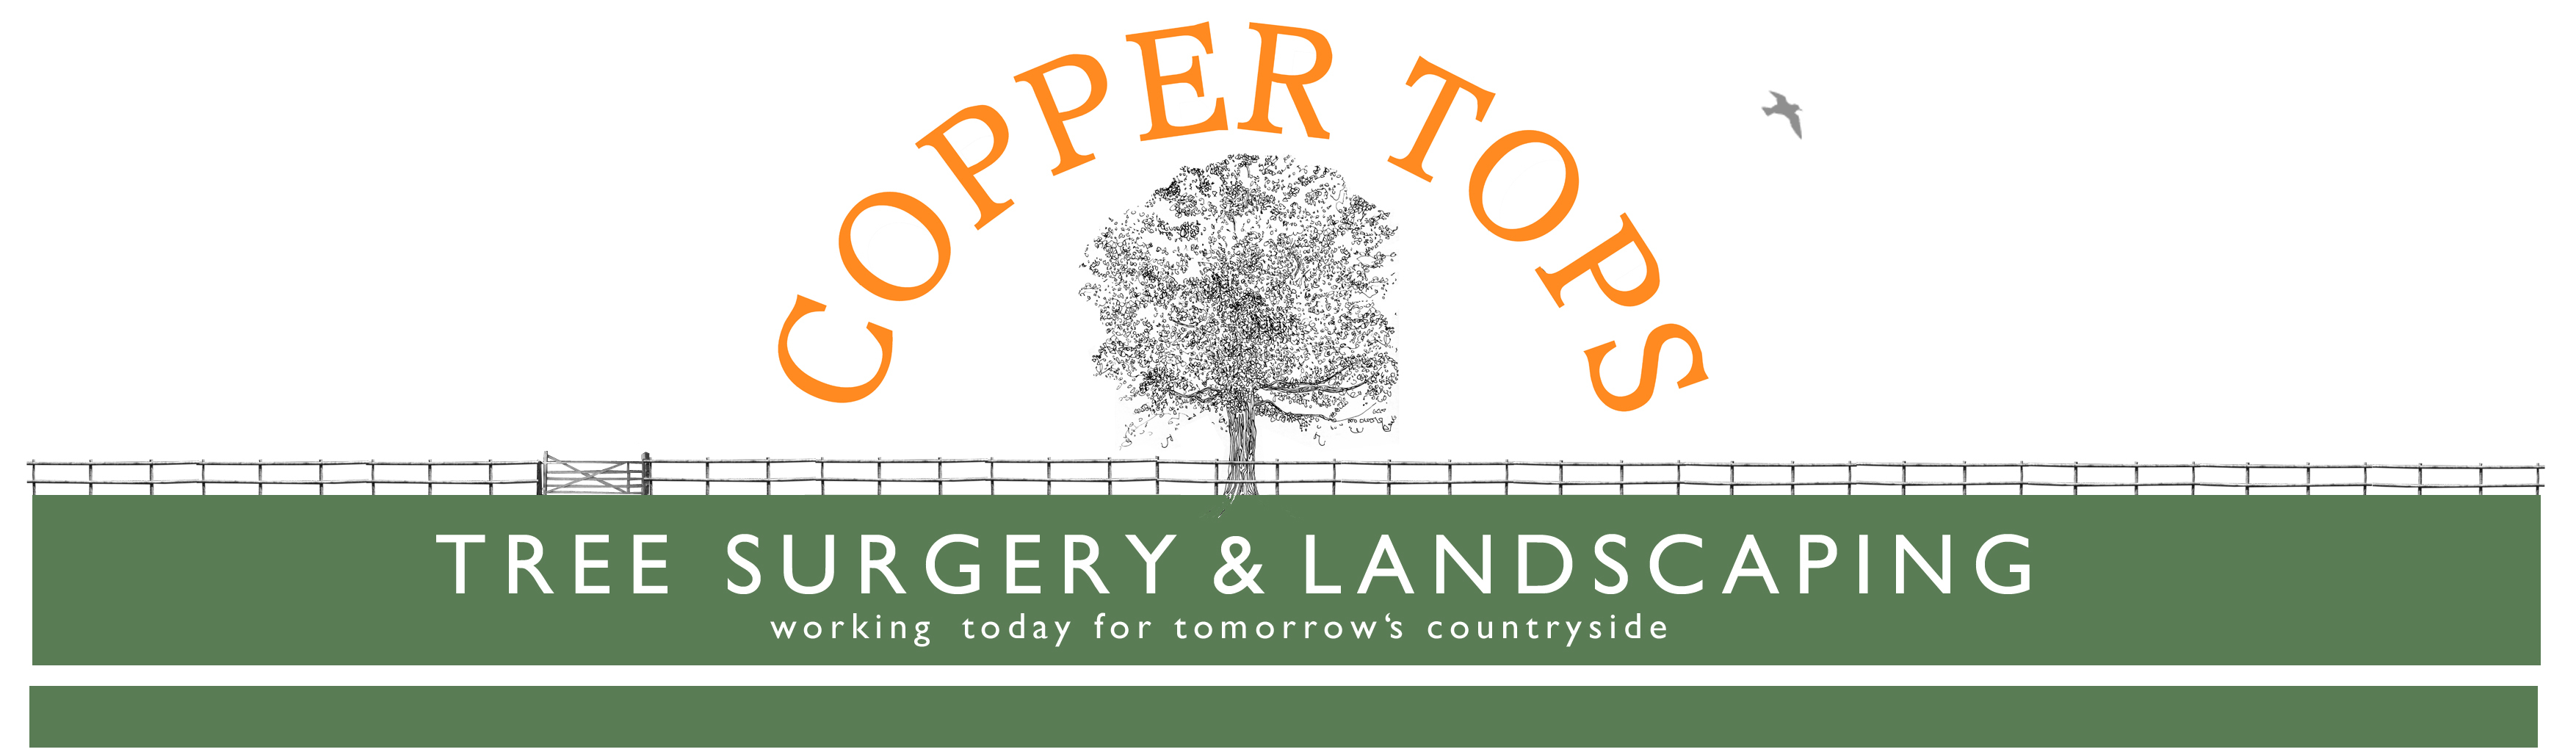 Copper Tops: Tree Surgery and Landscaping